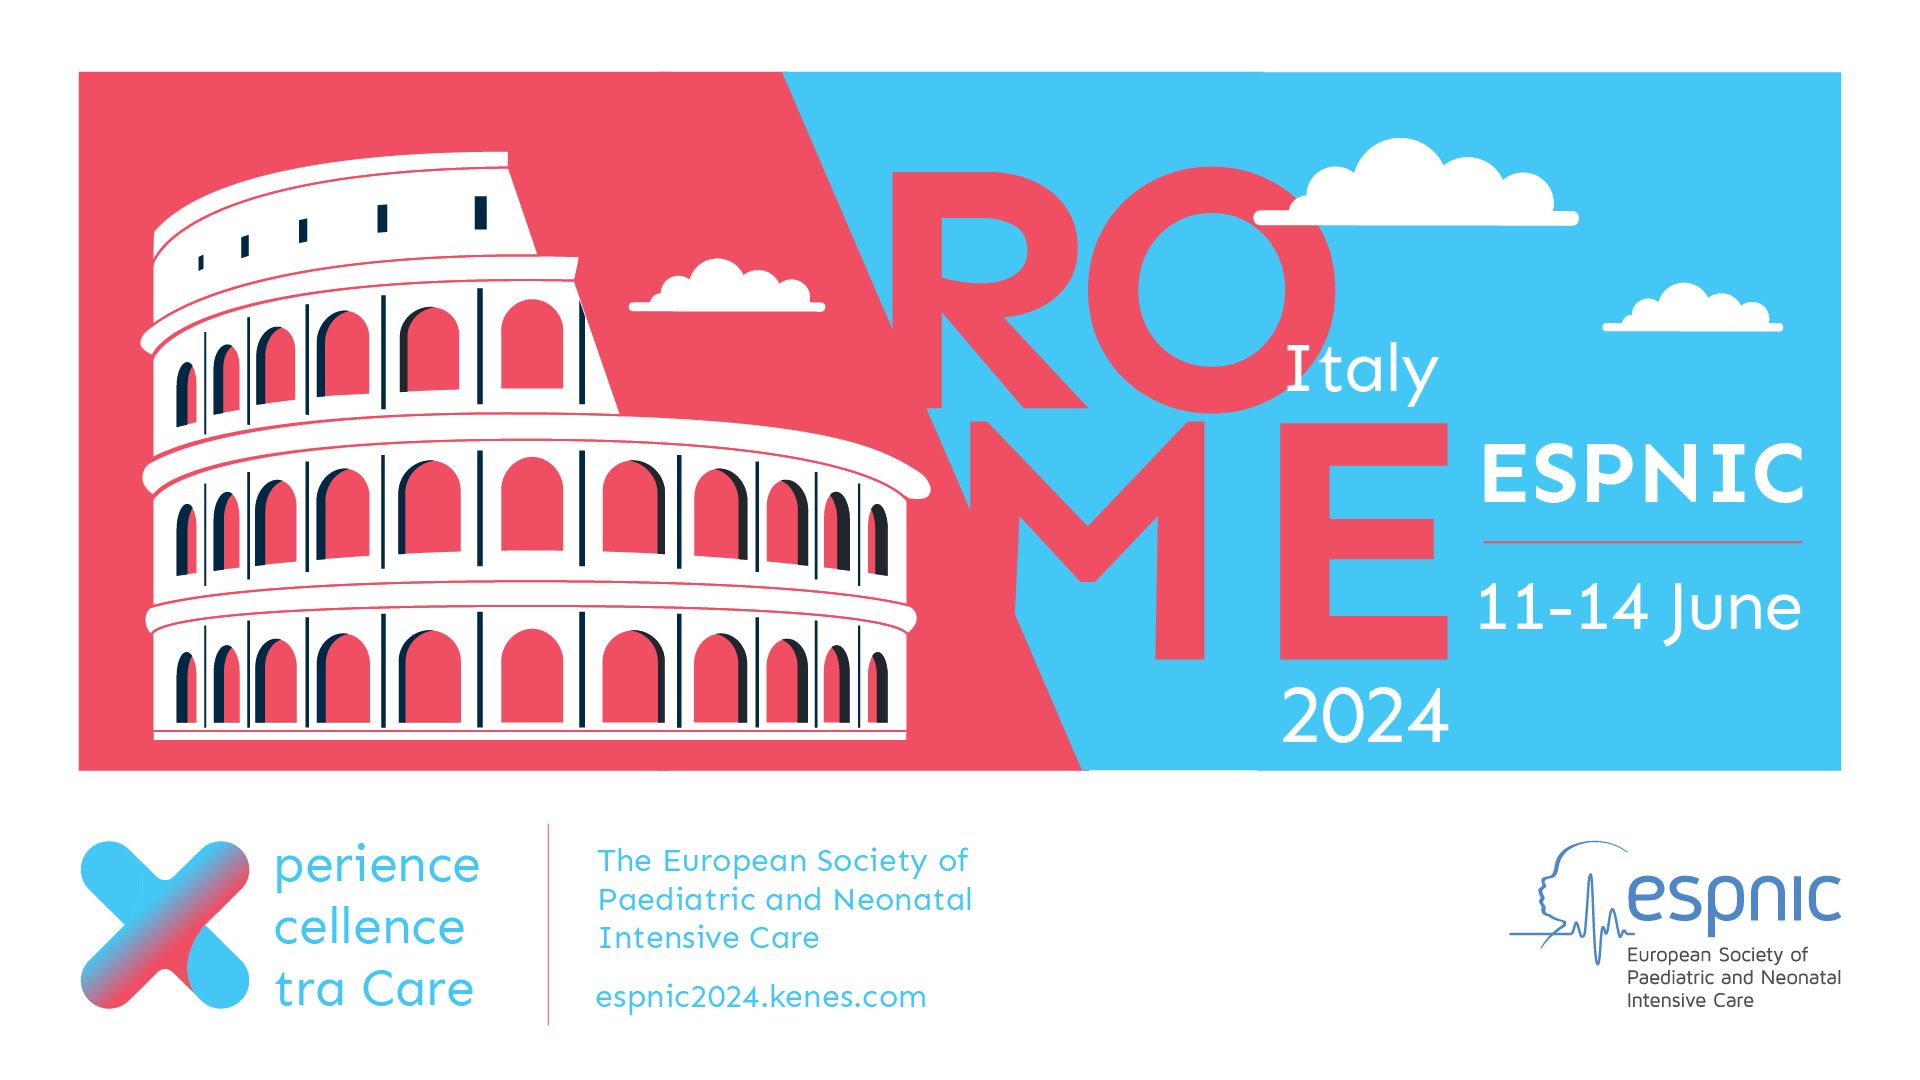 ESPNIC 2024: Annual Meeting of the European Society of Paediatric and Neonatal Intensive Care, Roma, Lazio, Italy